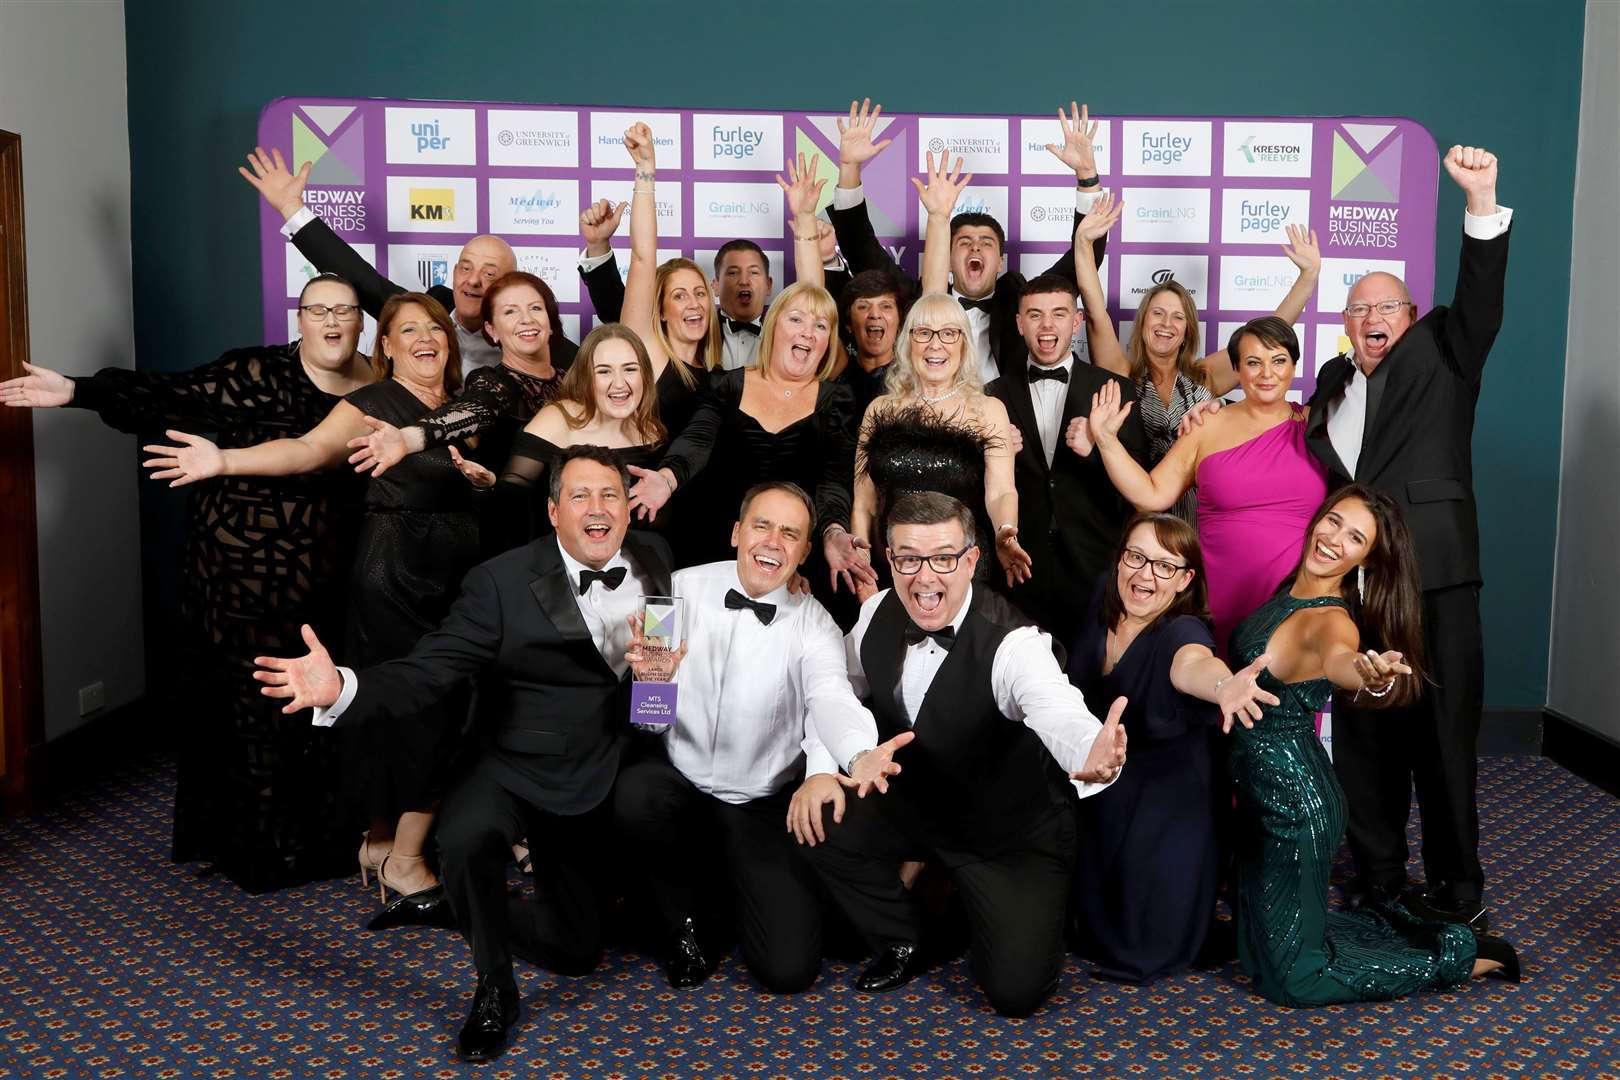 MTS Cleansing Services won Large Business of The Year